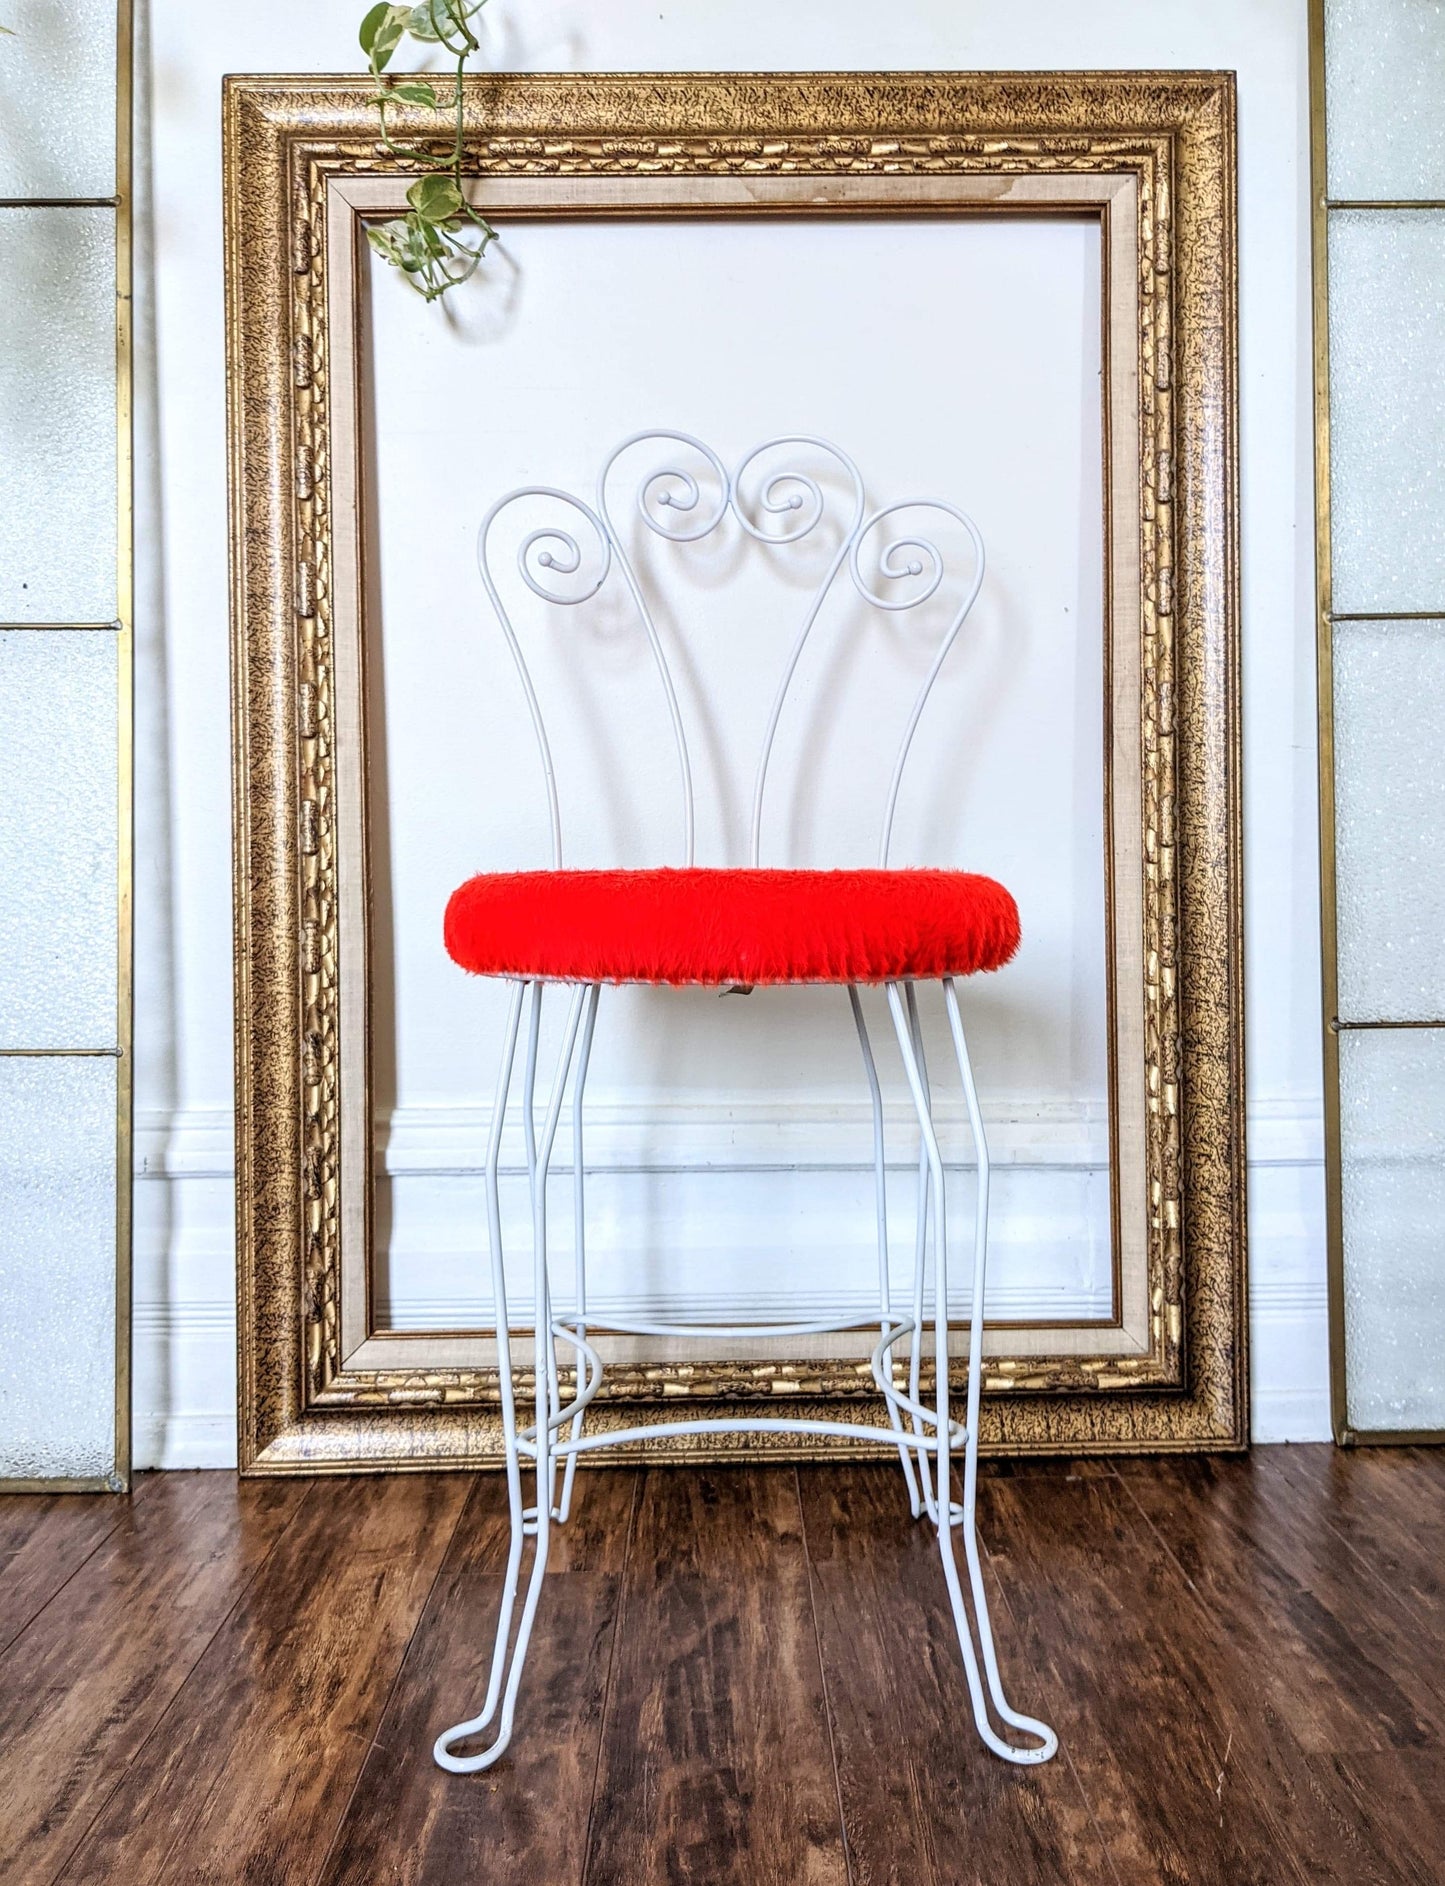 The Bella Donna Chair